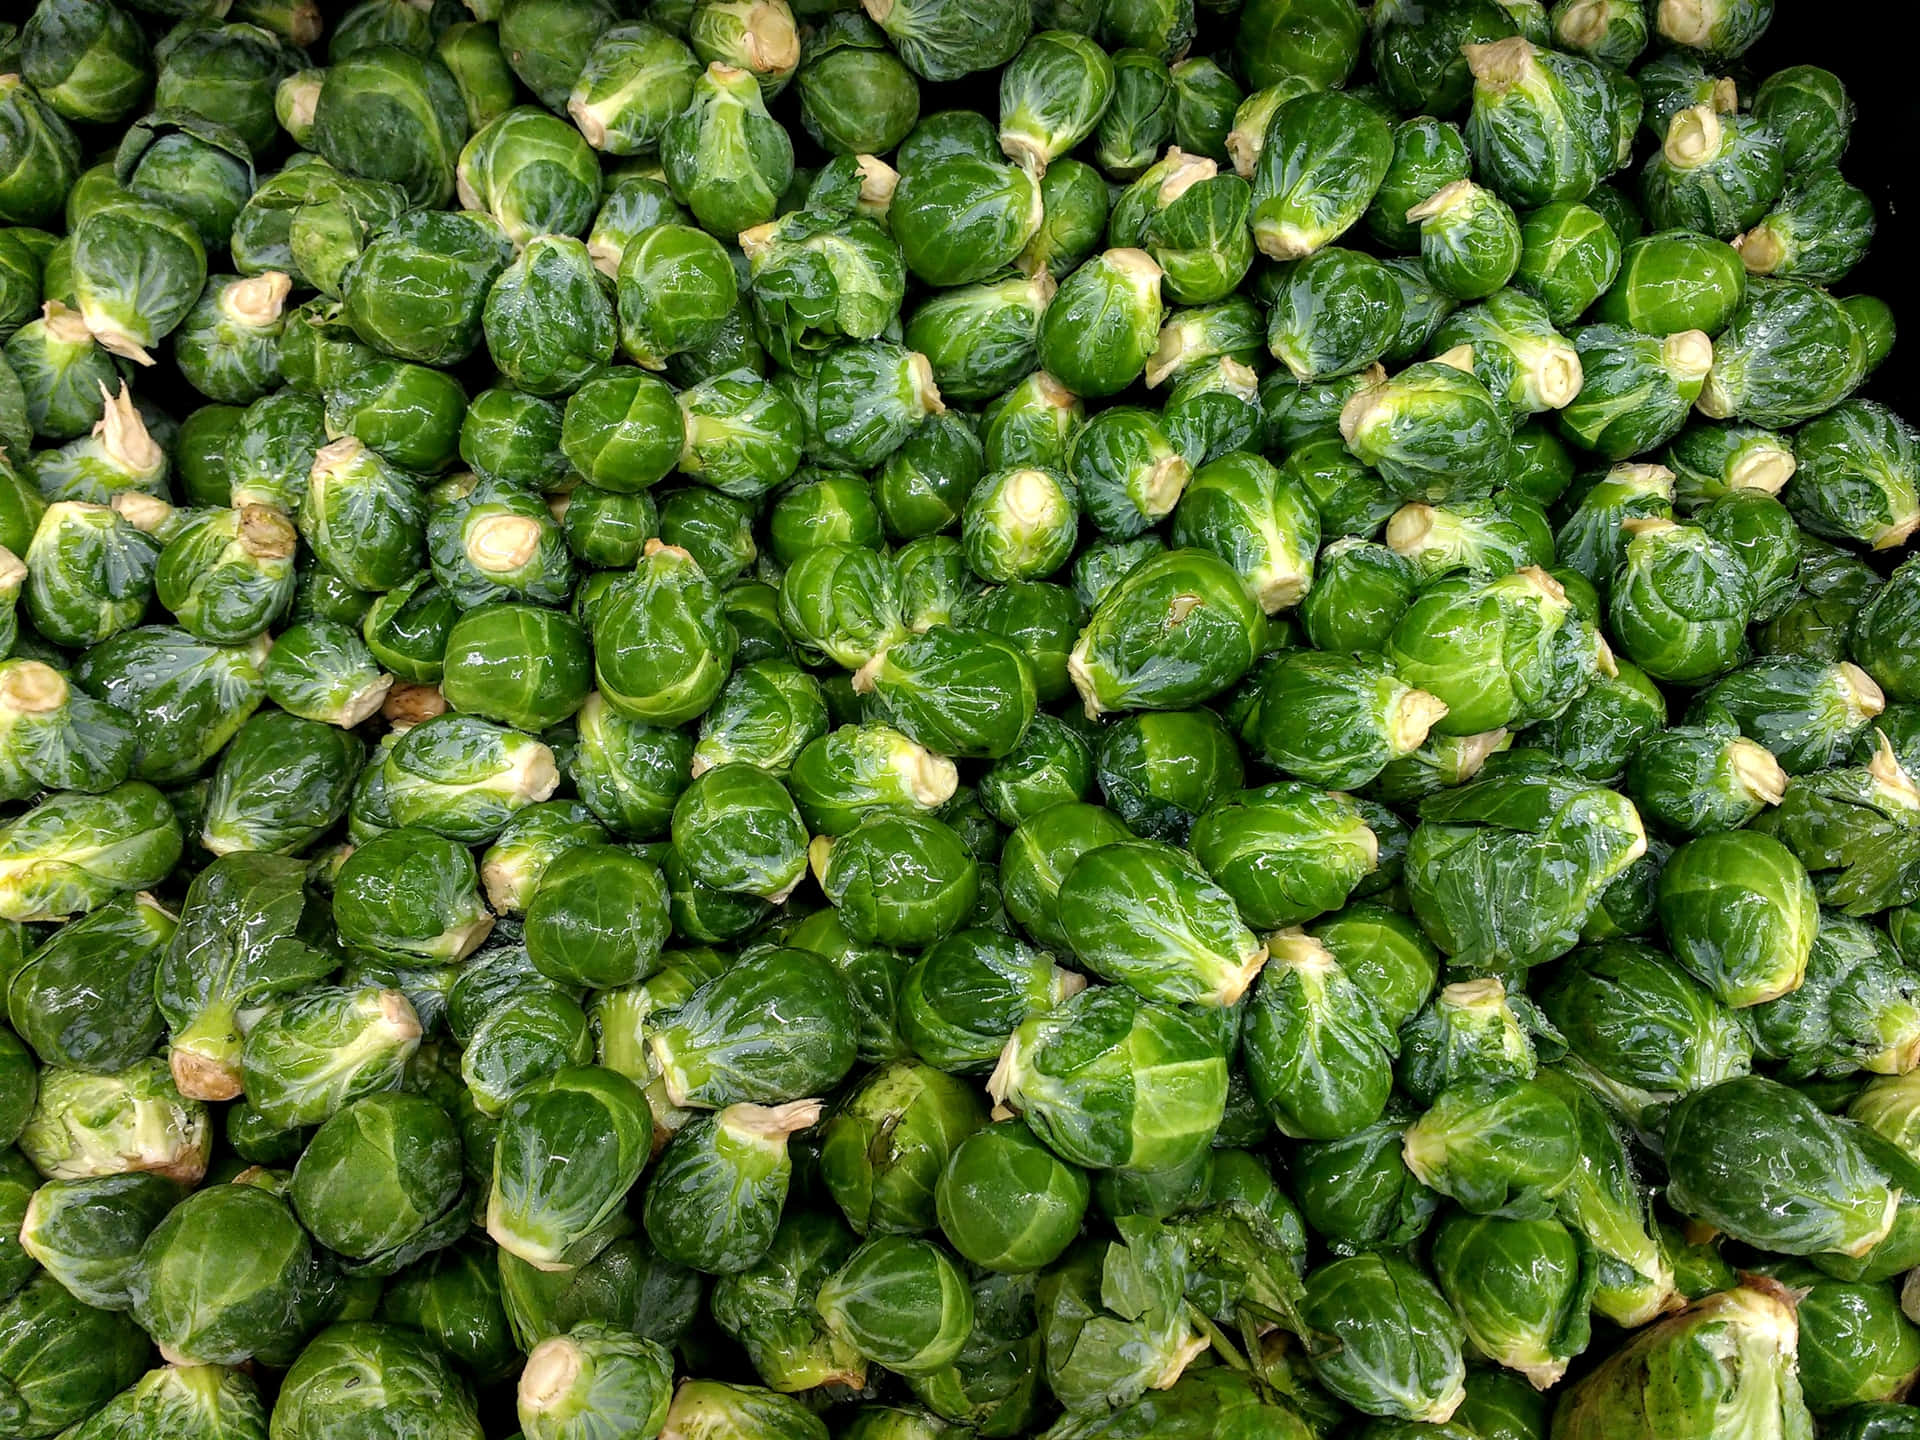 Fresh Brussels Sprouts Ready for a Delicious Meal